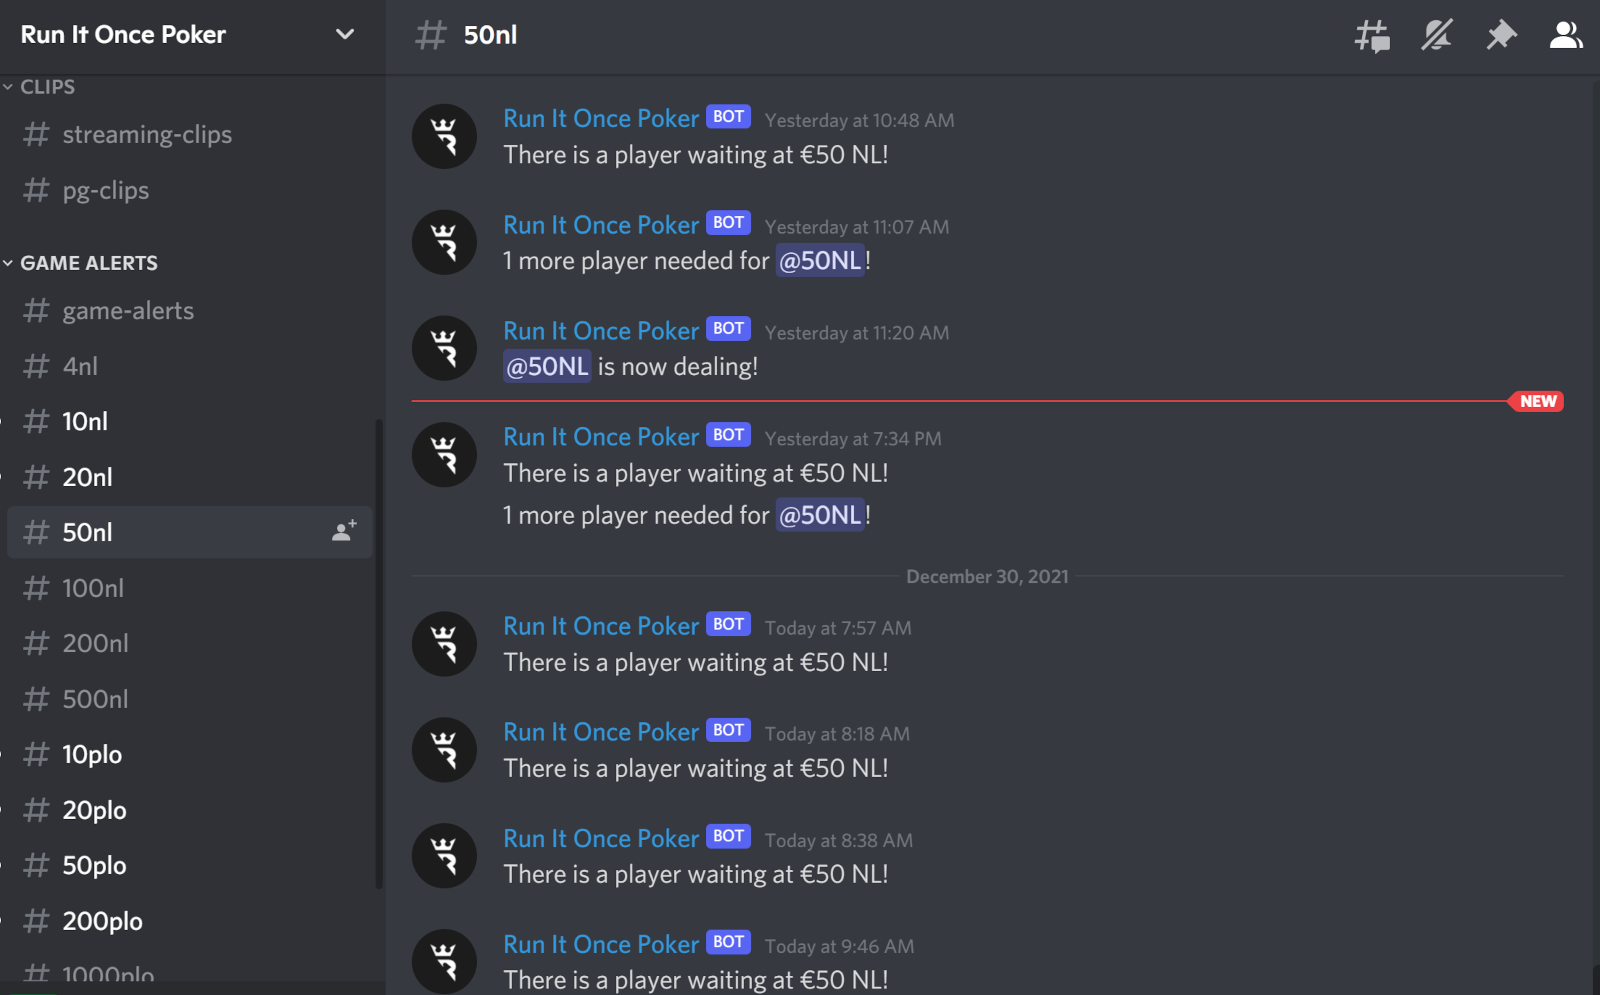 GGPoker Adds New Overlay Bot to its Discord Server | Pokerfuse